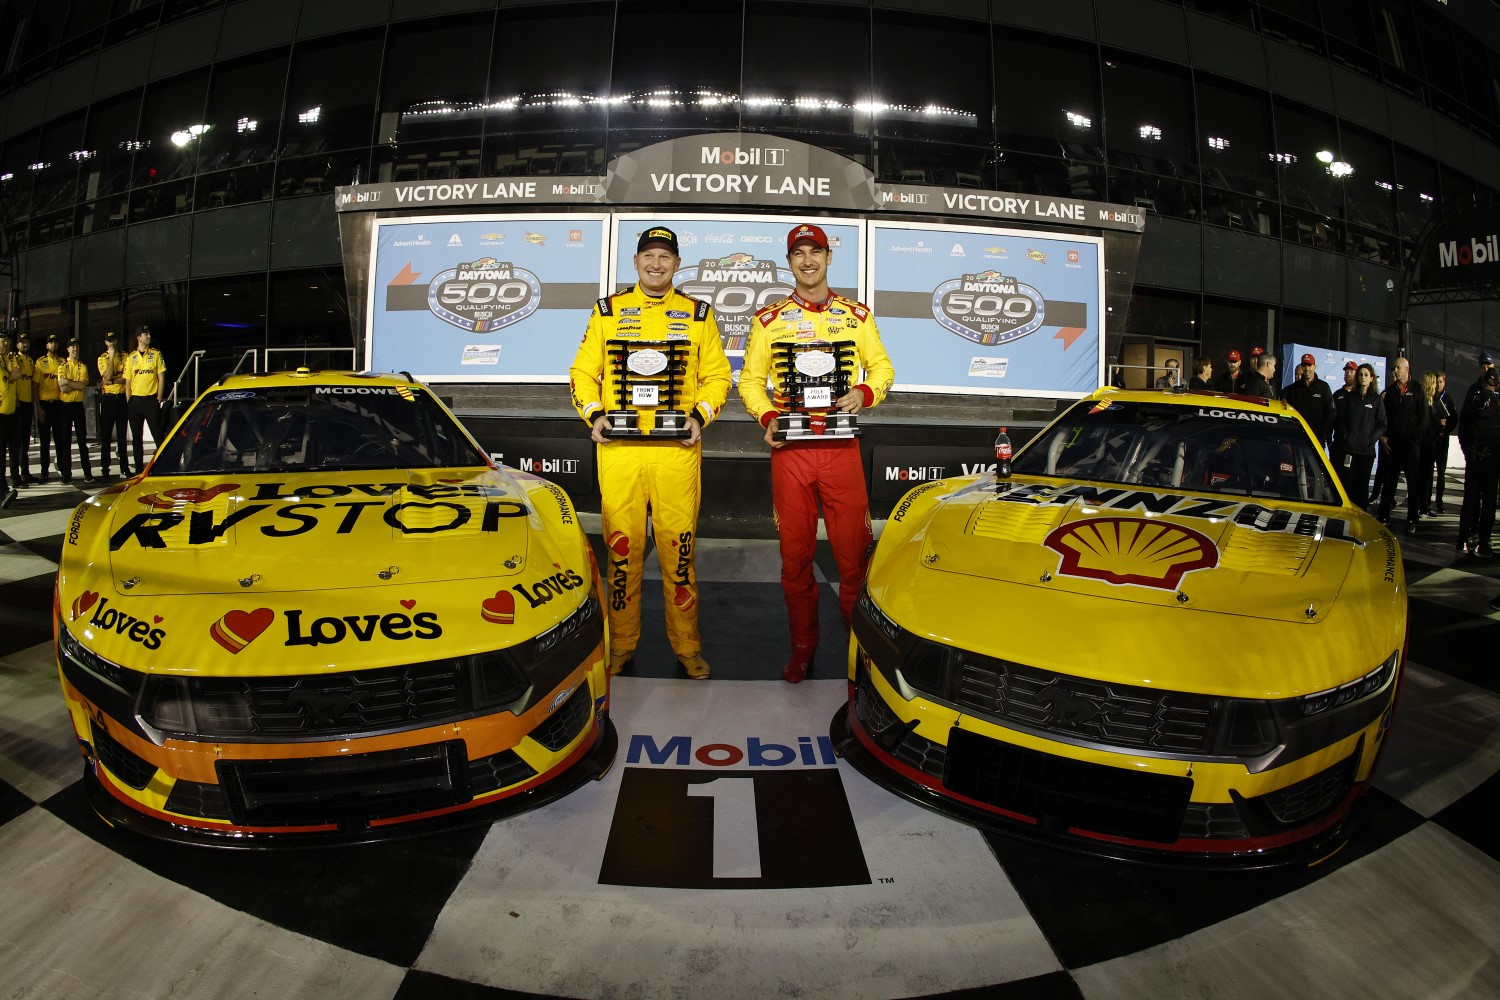 Joey Logano, driver of the #22 Shell Pennzoil Ford, (R) winner of the Daytona 500 pole award and Michael McDowell, driver of the #34 Love's Travel Stops Ford, Front Row second fastest winner pose for a photo during qualifying for the NASCAR Cup Series Daytona 500 at Daytona International Speedway on February 14, 2024 in Daytona Beach, Florida. (Photo by Sean Gardner/Getty Images)